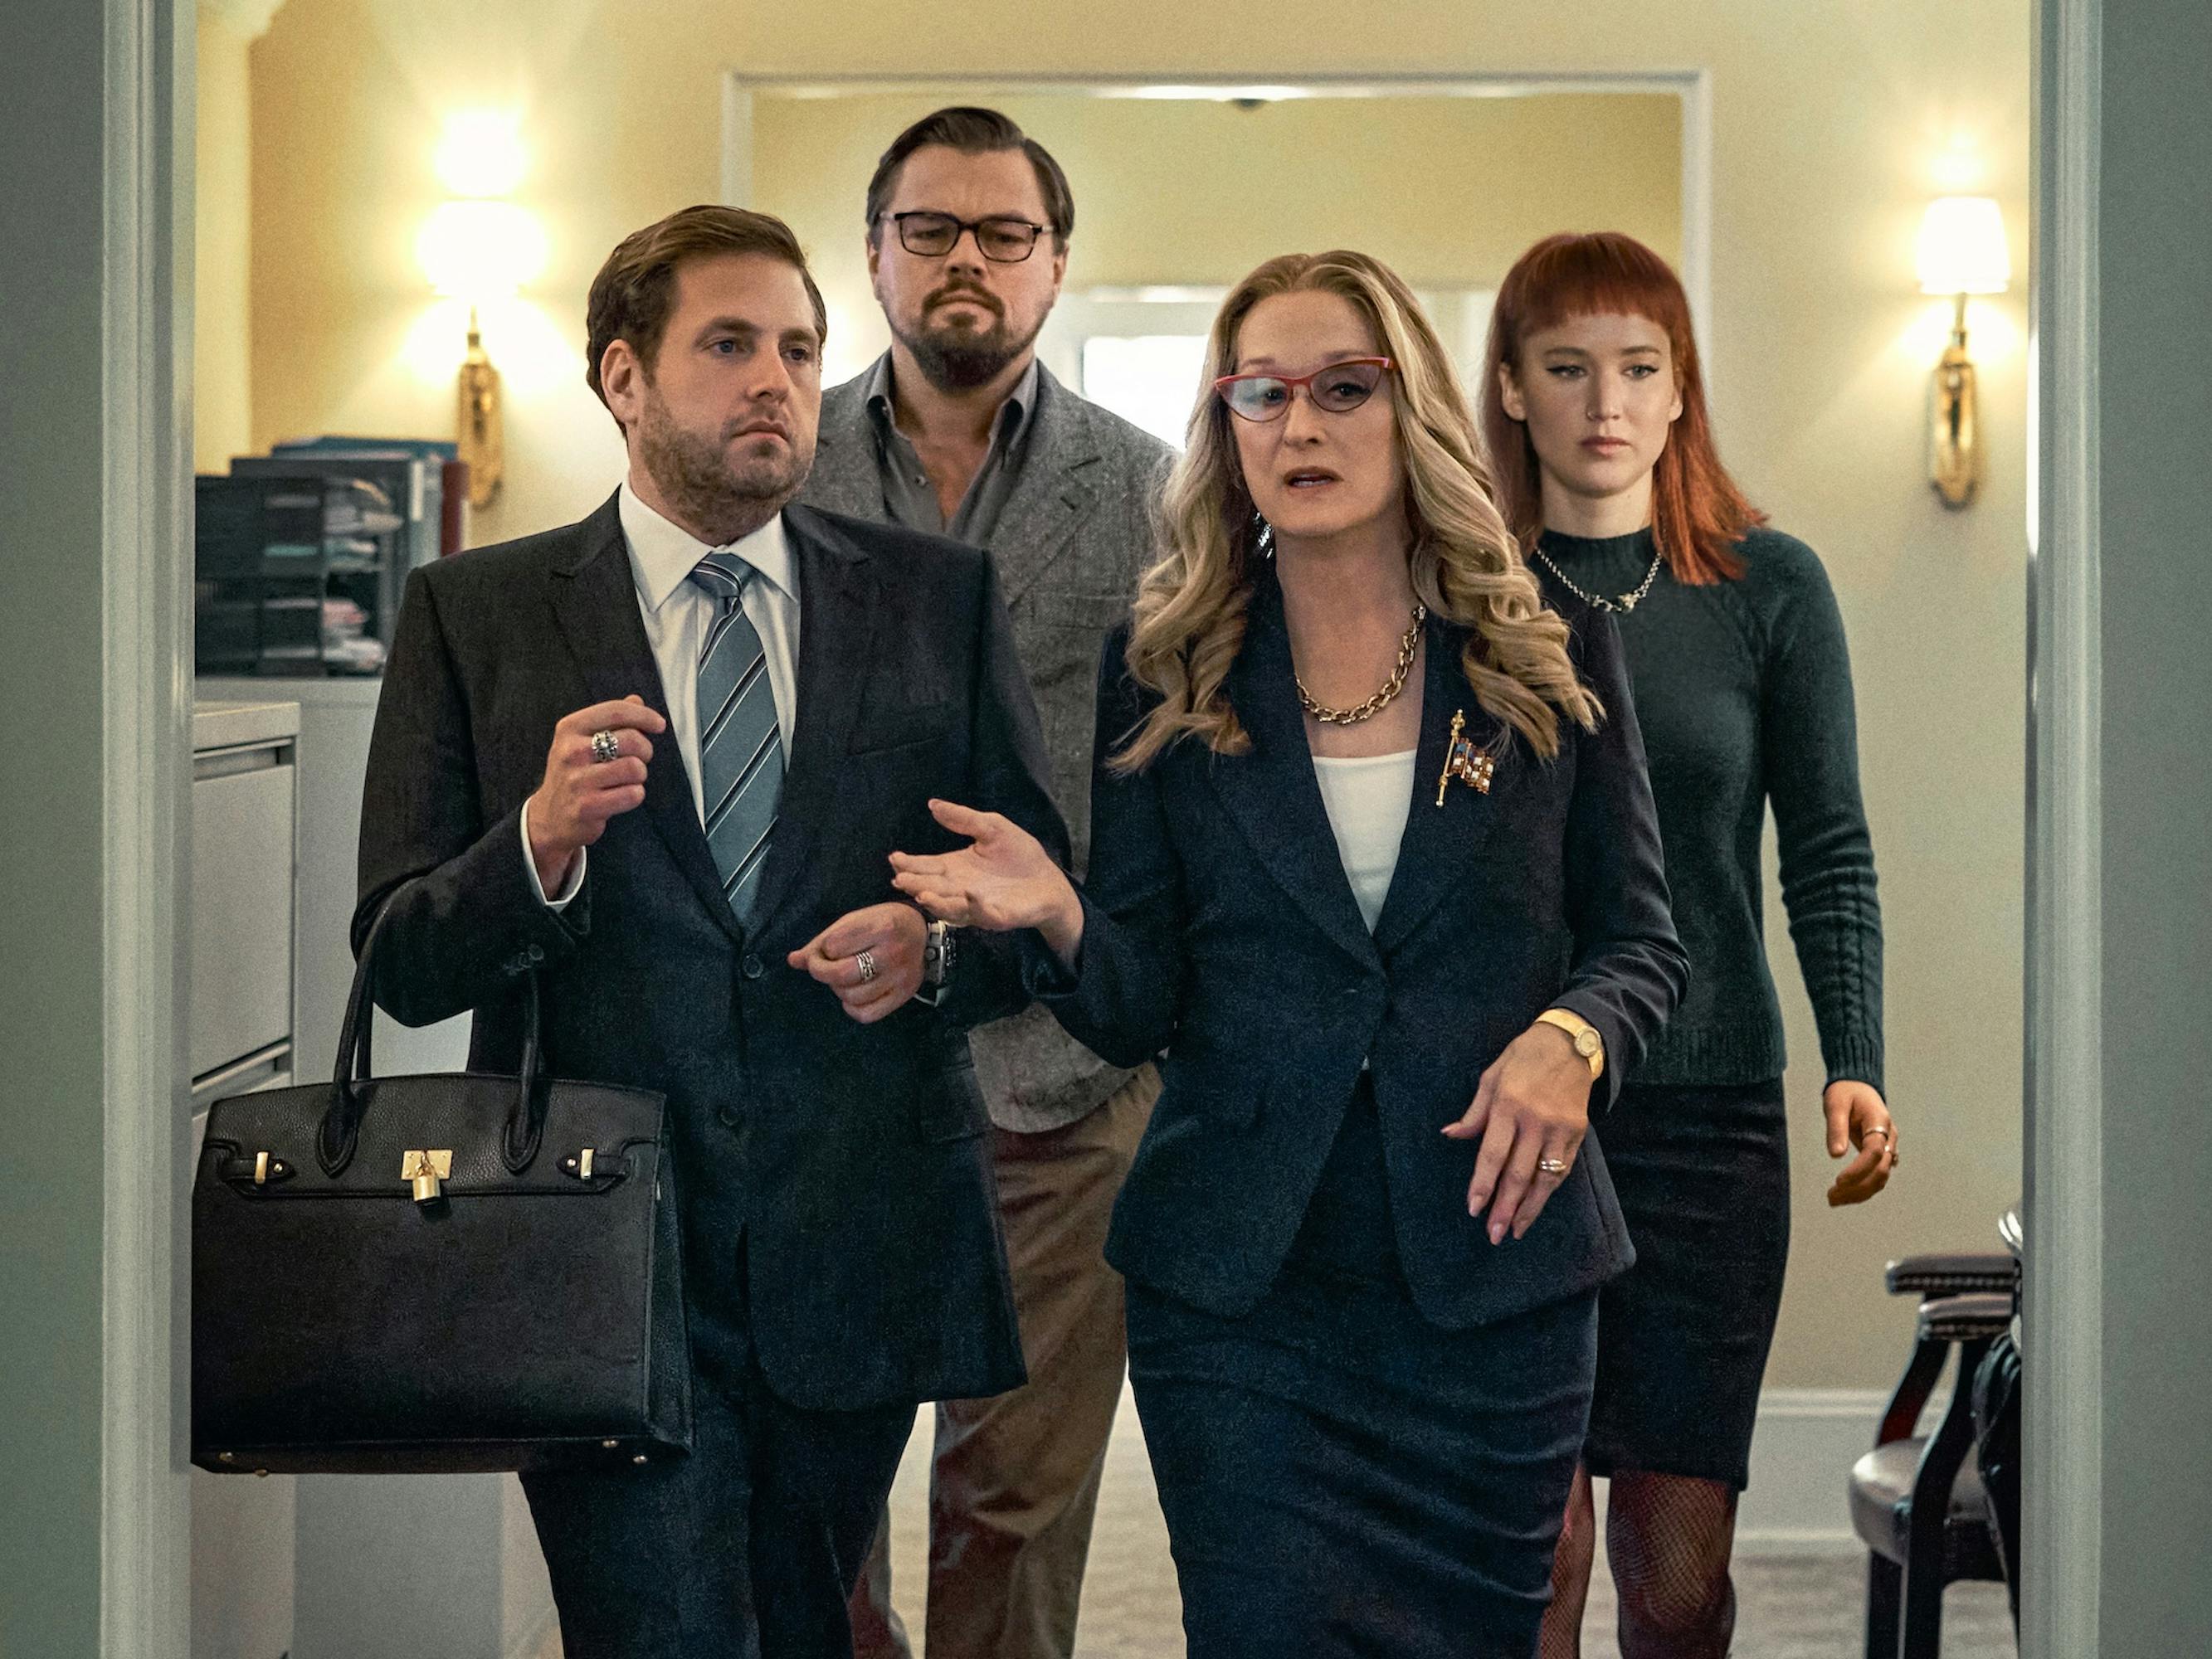 Jonah Hill, Leonardo DiCaprio, Meryl Streep, and Jennifer Lawrence walk through a White House hallway. Hill wears a navy suit and carries a black Birkin. DiCaprio wears khakis and a grey blazer. Streep wears a navy skirt suit. Lawrence wears a grey knit dress.